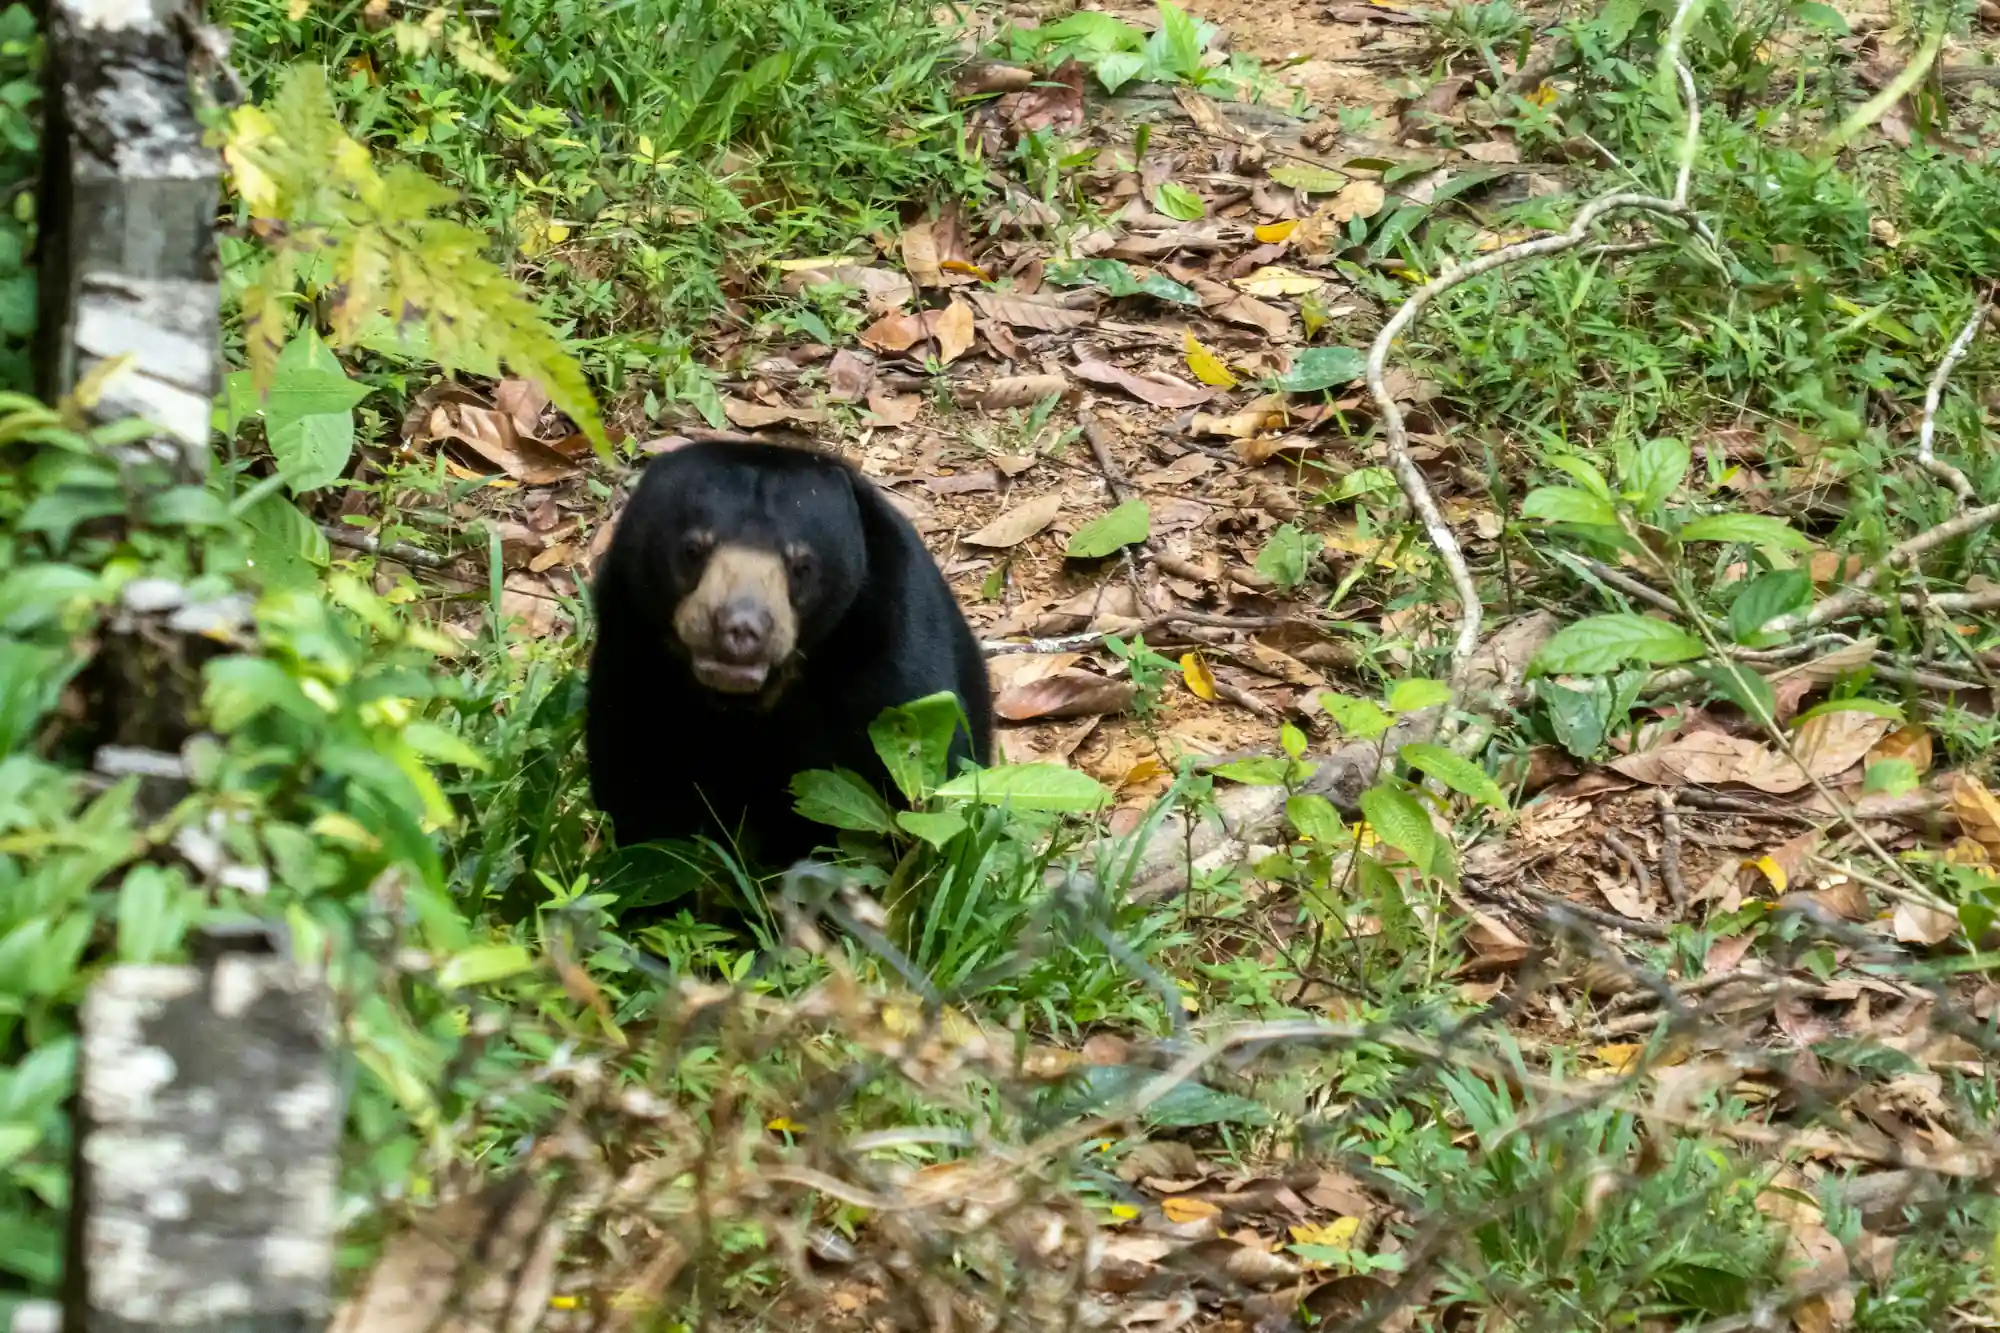 Sun Bear on the rainforest floor looking up at the camera